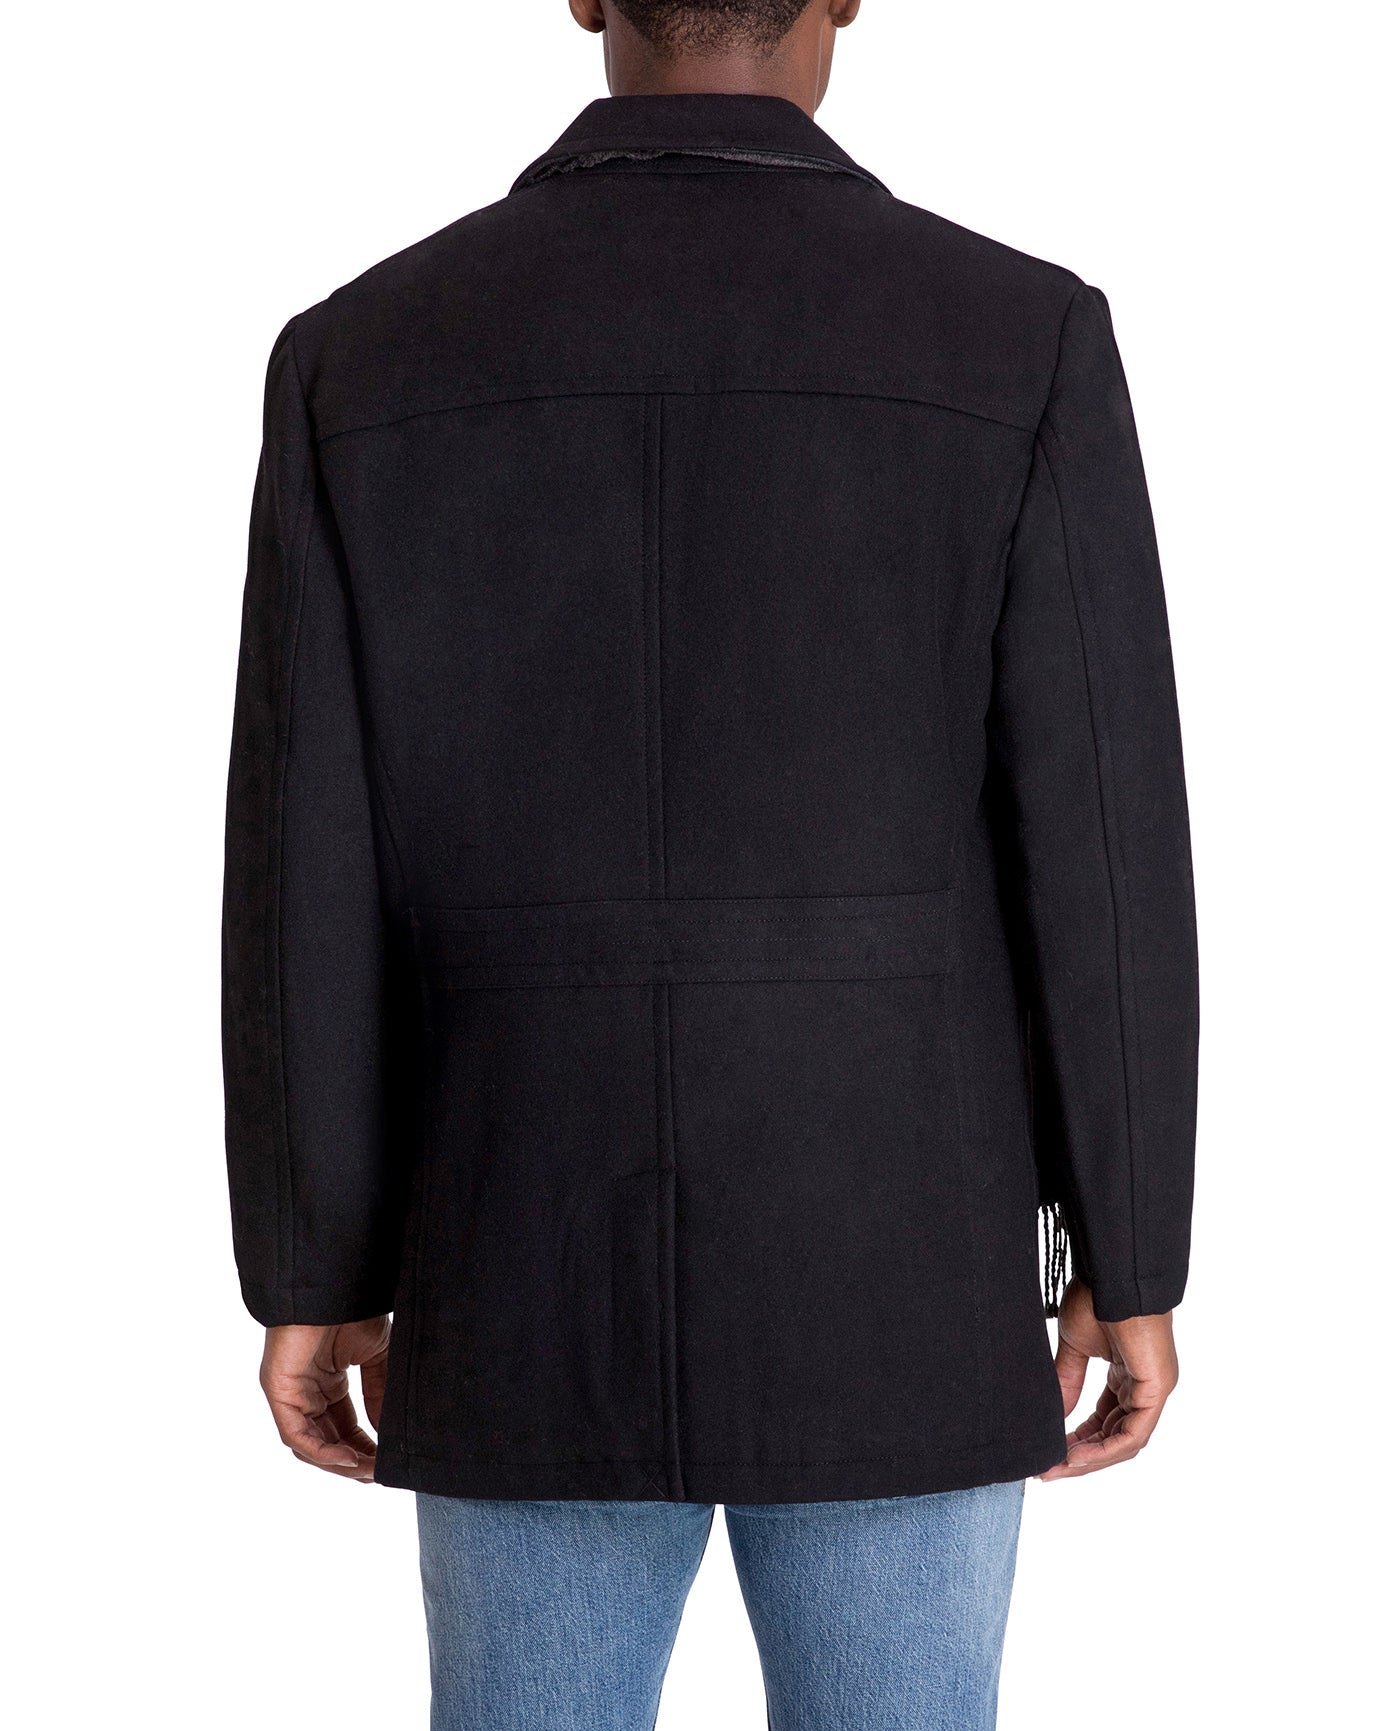 BACK VIEW OF AMITY SINGLE BREASTED WOOL JACKET | BLACK